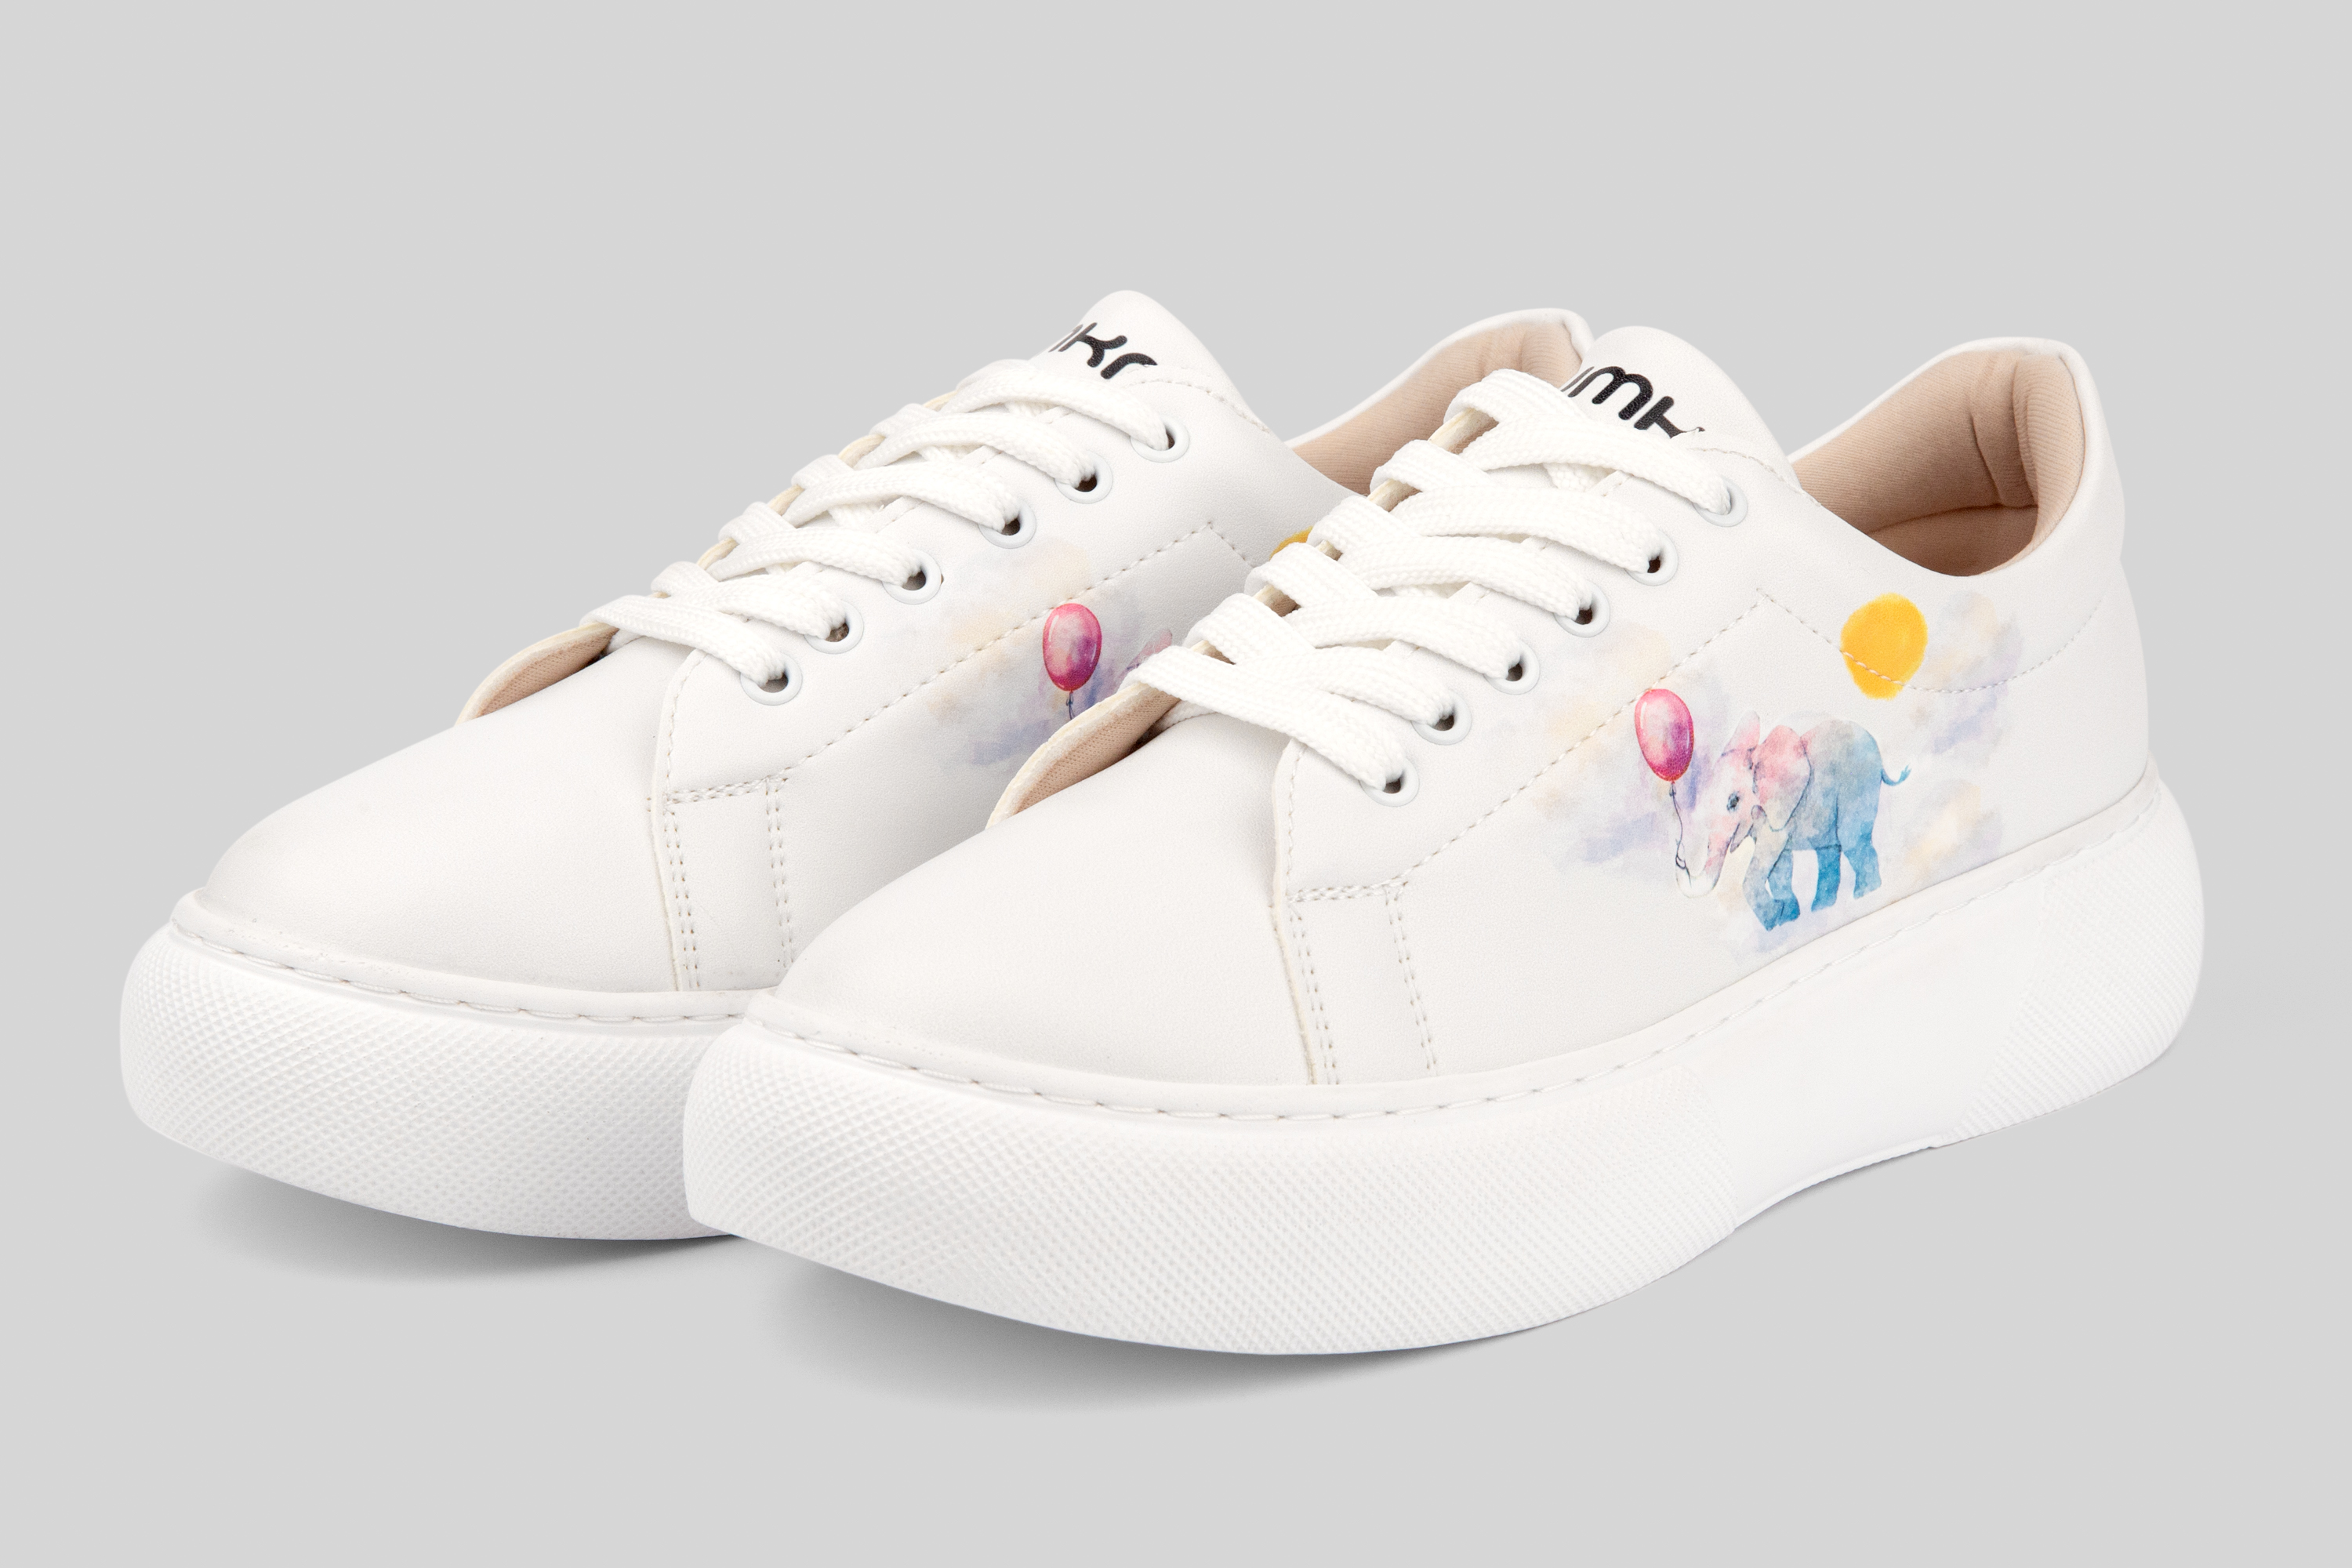 Elephants Sneakers BY Mumka - Sneakers available at DOYUF